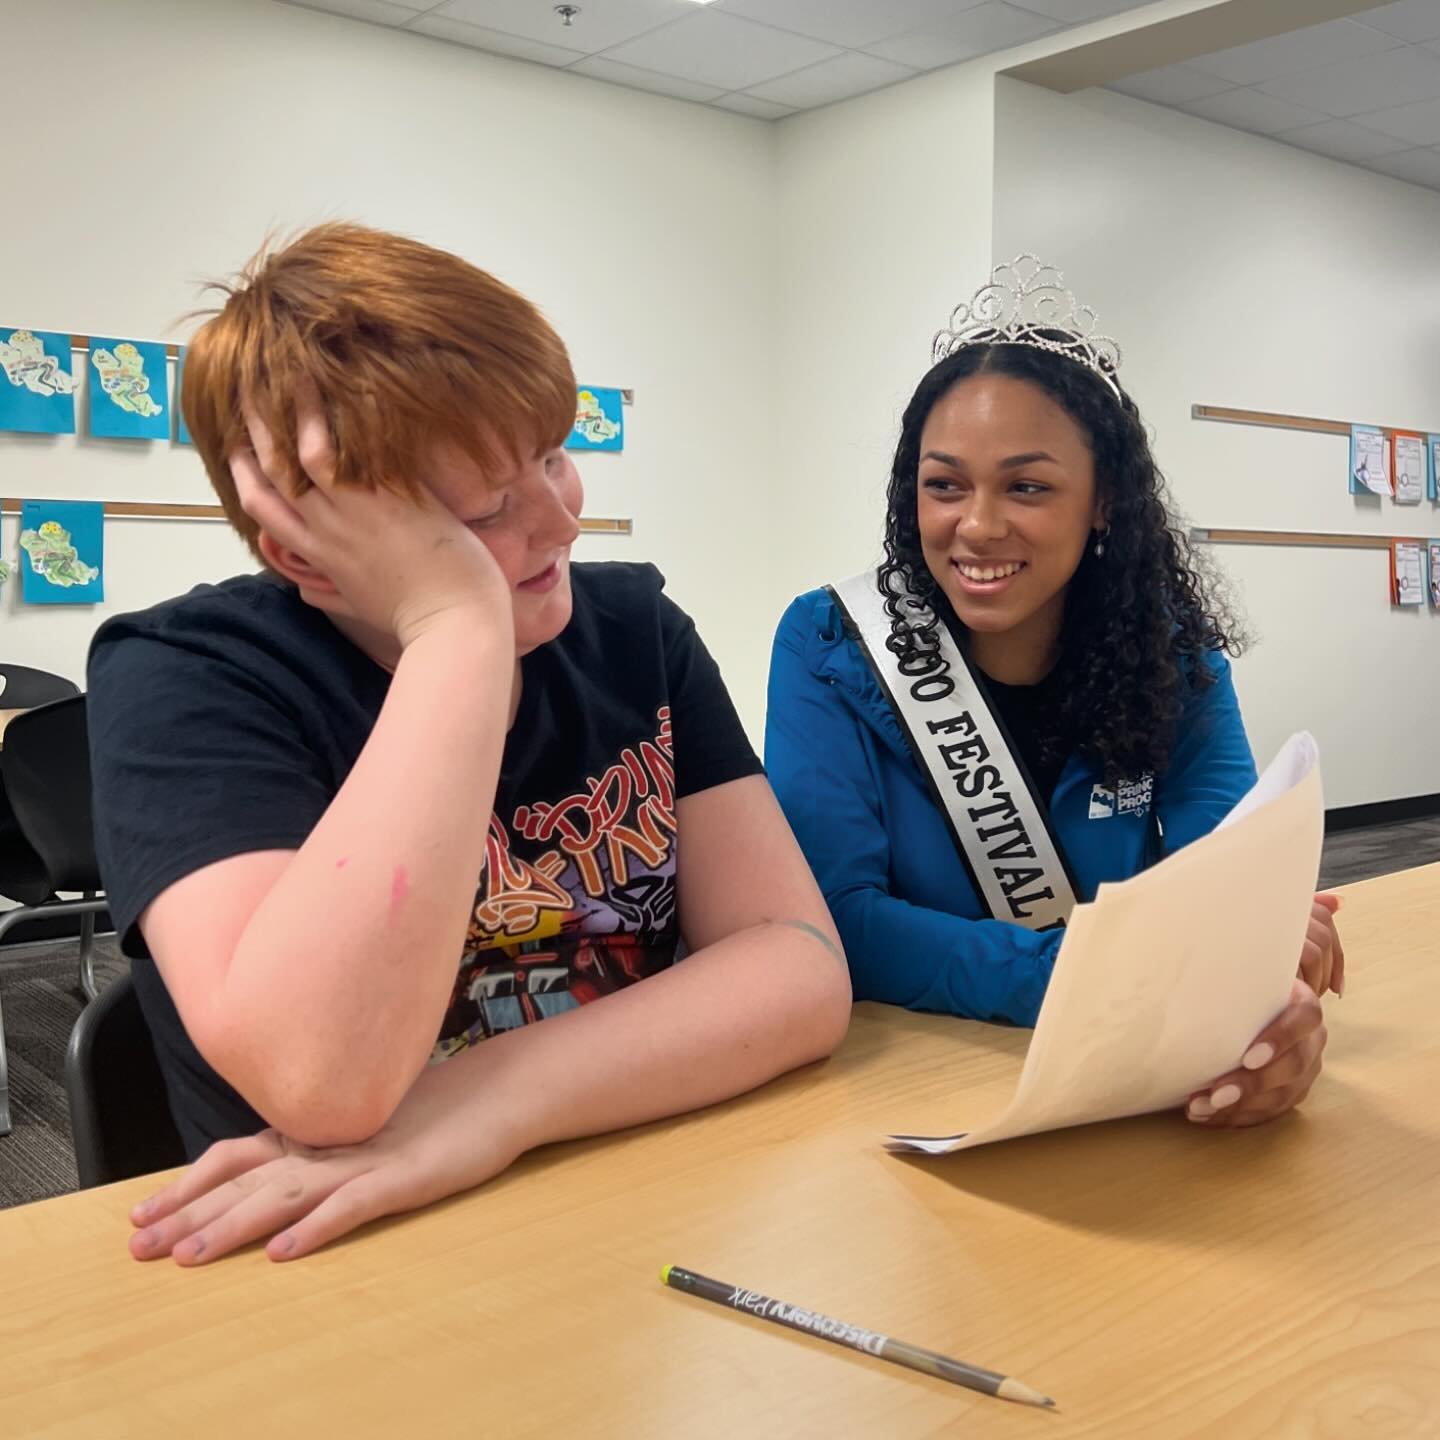 We would like to formally congratulate our Chief Mentorship Officer Jaslin Martinez for participating in The 500 Princess Program. The Princess Program is a tribute to Indiana&rsquo;s most accomplished young women. 

There are 33 of women selected to